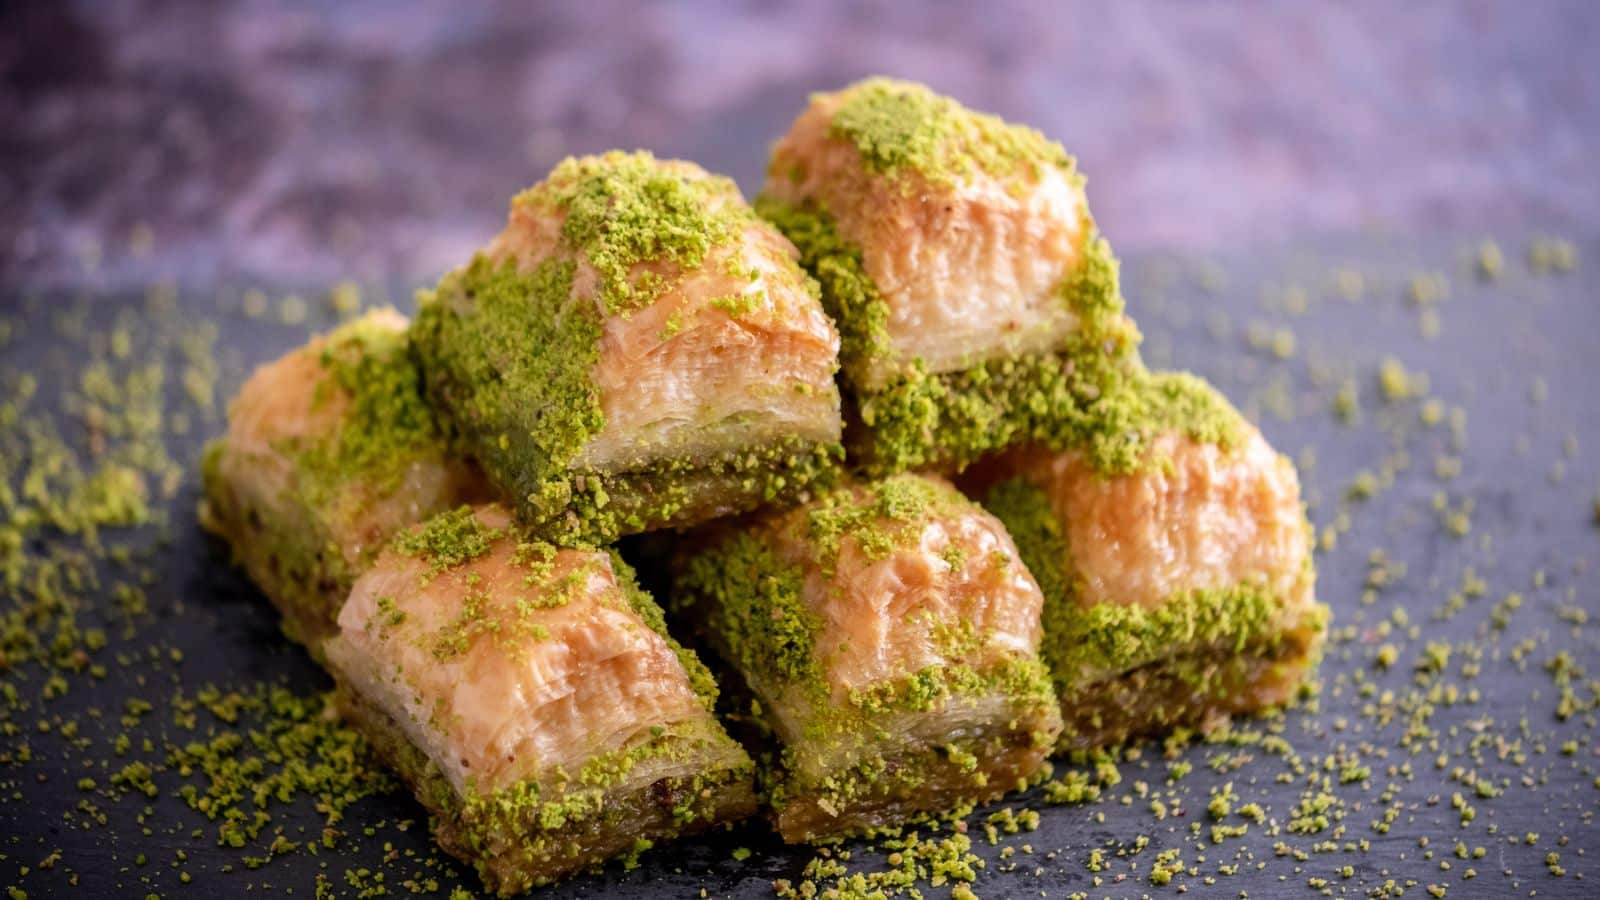 <p><span>A popular Middle Eastern dessert, baklava consists of layers of flaky pastry filled with nuts and soaked in honey or syrup. It’s a sweet and decadent treat that can be found at street vendors throughout Turkey.</span></p><p><span>Baklava is more than a dessert; it’s a testament to Turkey’s rich history and culinary expertise. Each bite of this sweet, sticky pastry tells a story of tradition and craftsmanship passed down through generations. When you savor a piece of baklava, you’re partaking in a timeless Turkish delight that embodies the spirit of the region’s hospitality and love for good food. </span></p>